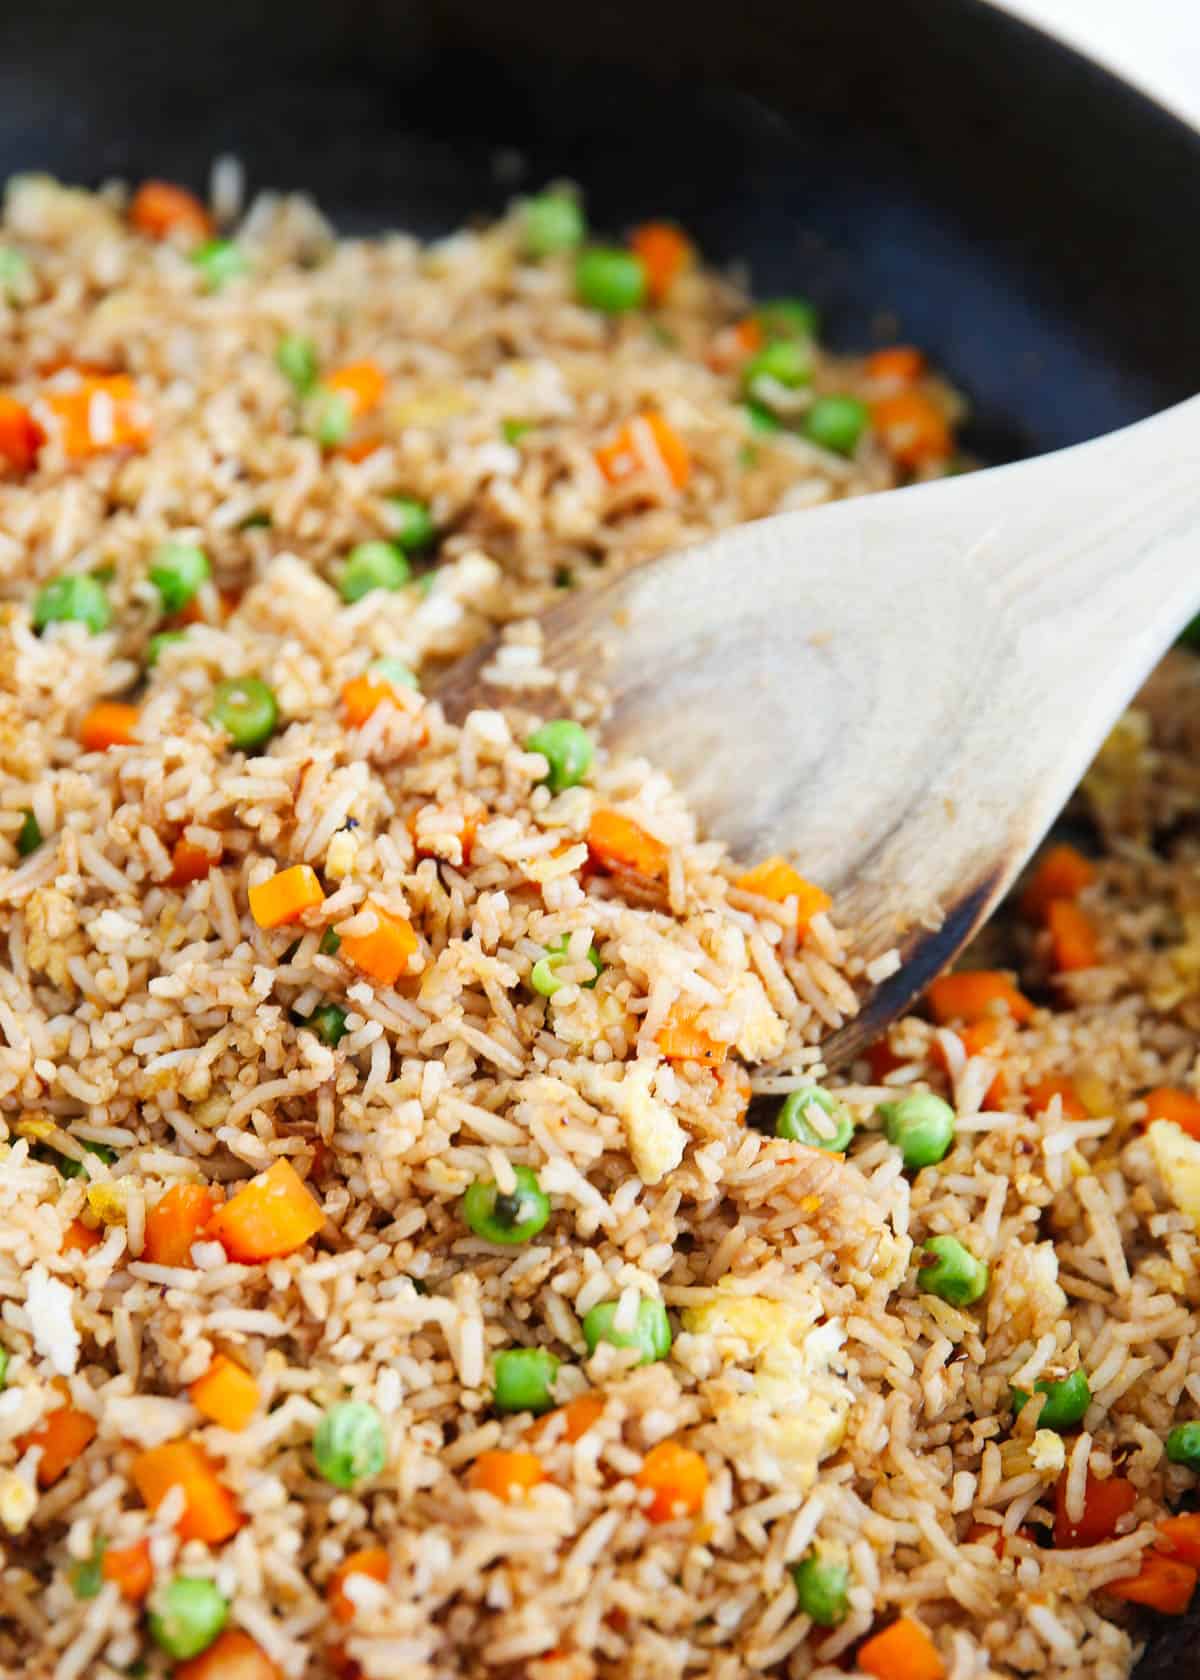 Spoonful of fried rice in a skillet.